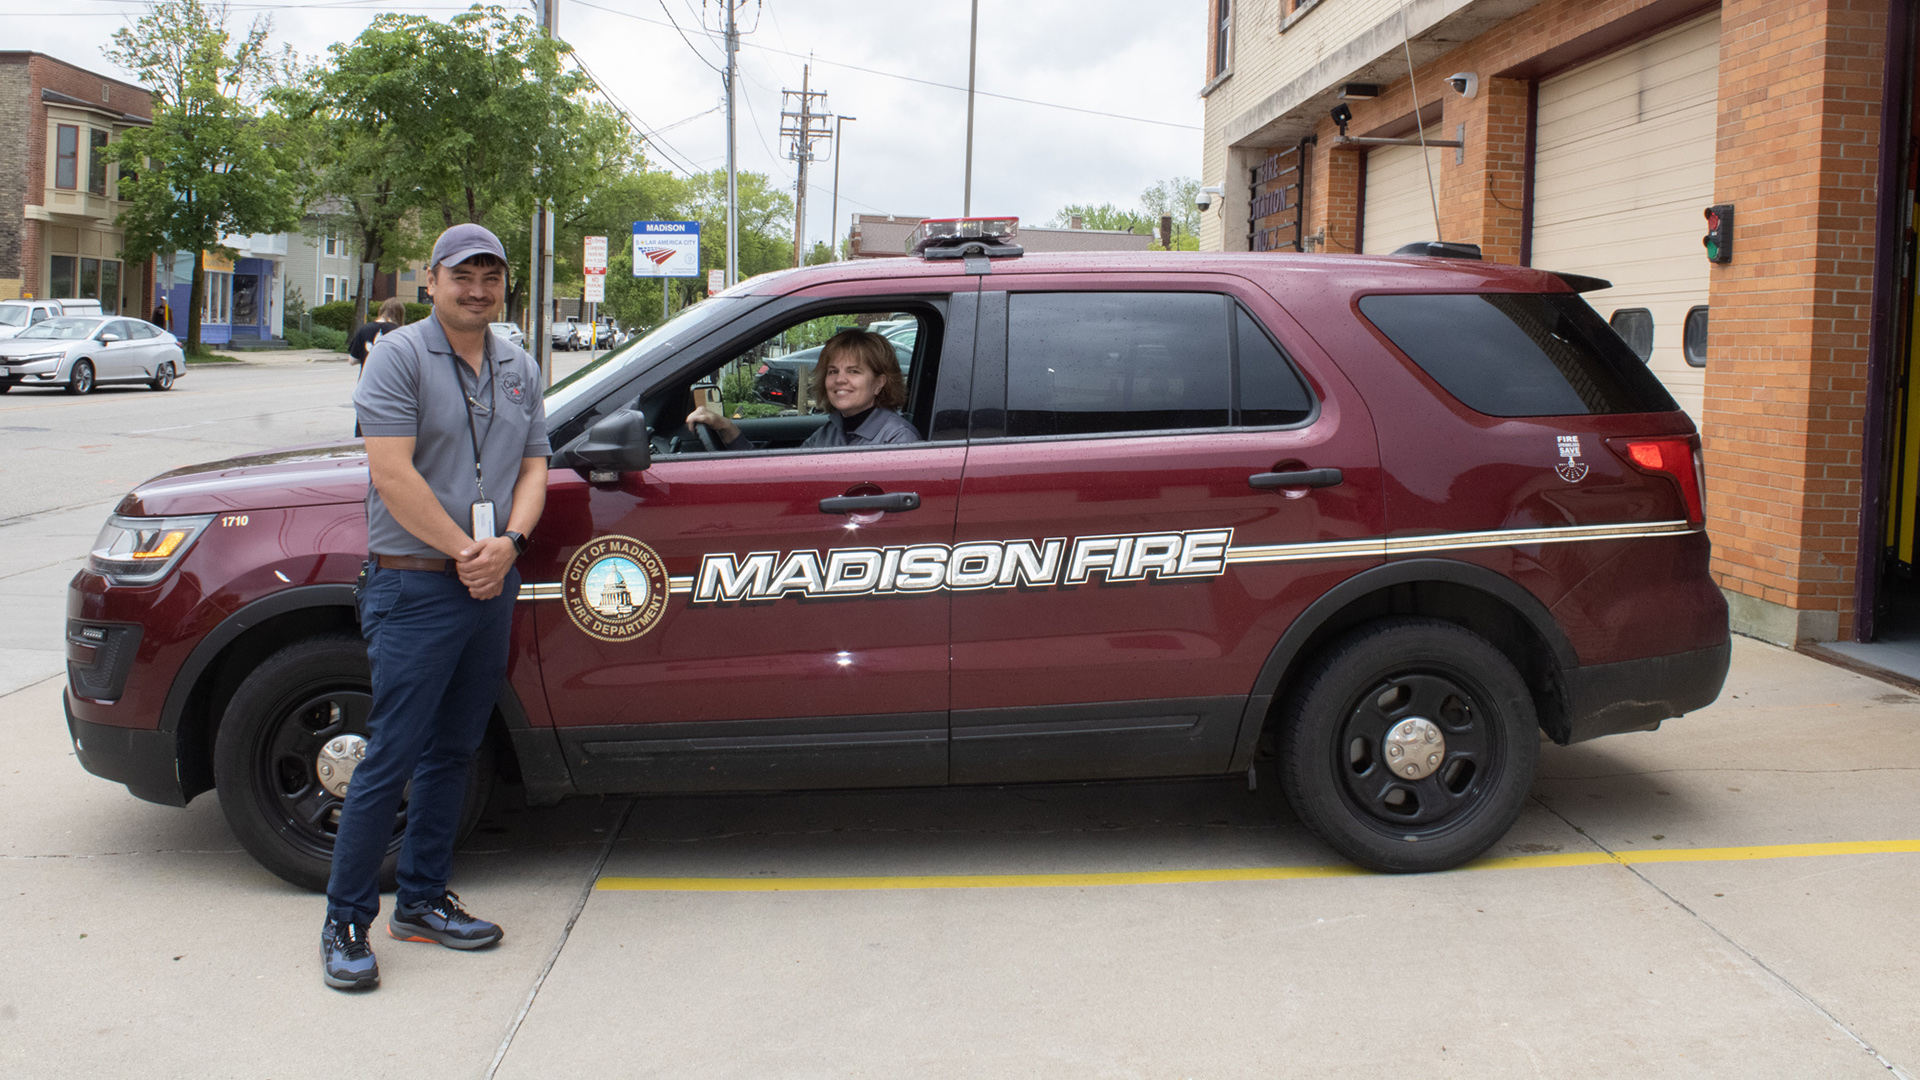 Amy Yelk Meinholz sits in the driver's seat of a red SUV with the City of Madison Fire Department logo and the words "Madison Fire" on its doors, while Eric Kinderman stands outside on a concrete driveway next to the driver's side mirror, outside a building with multiple garage doors with windows, with other vehicles, buildings and trees in the background.